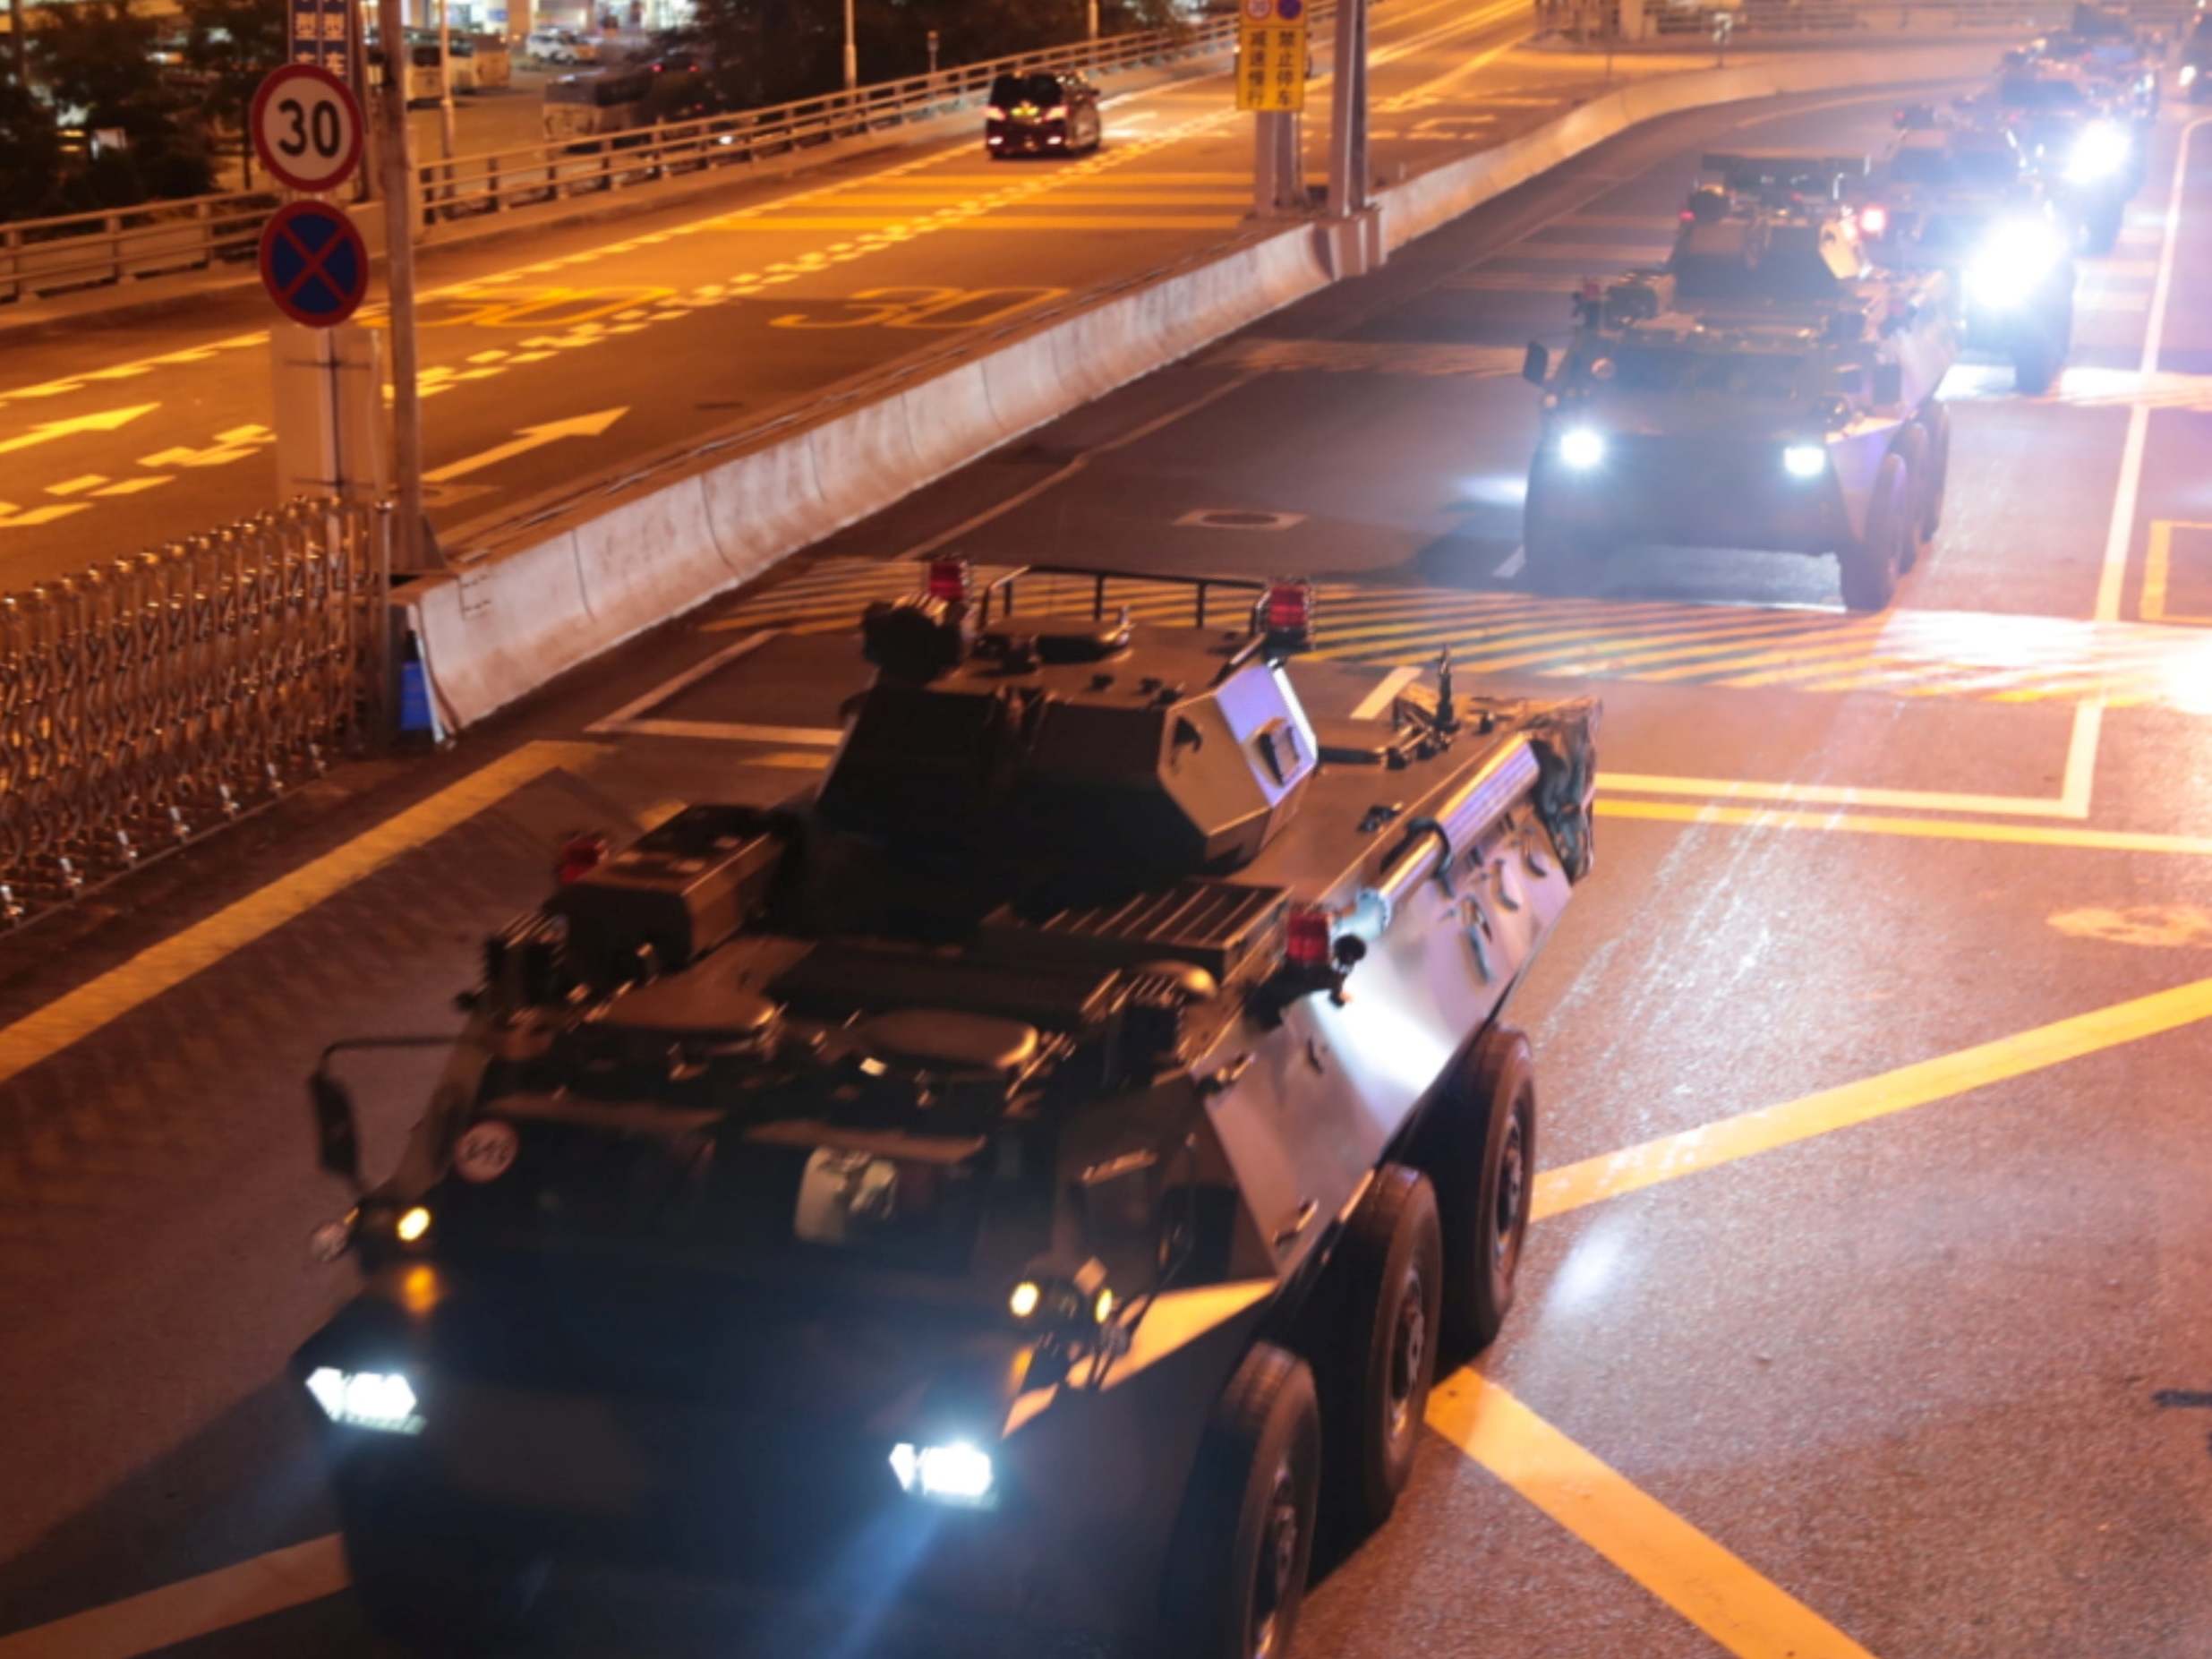 Military vehicles of the Chinese People's Liberation Army (PLA) enter Hong Kong